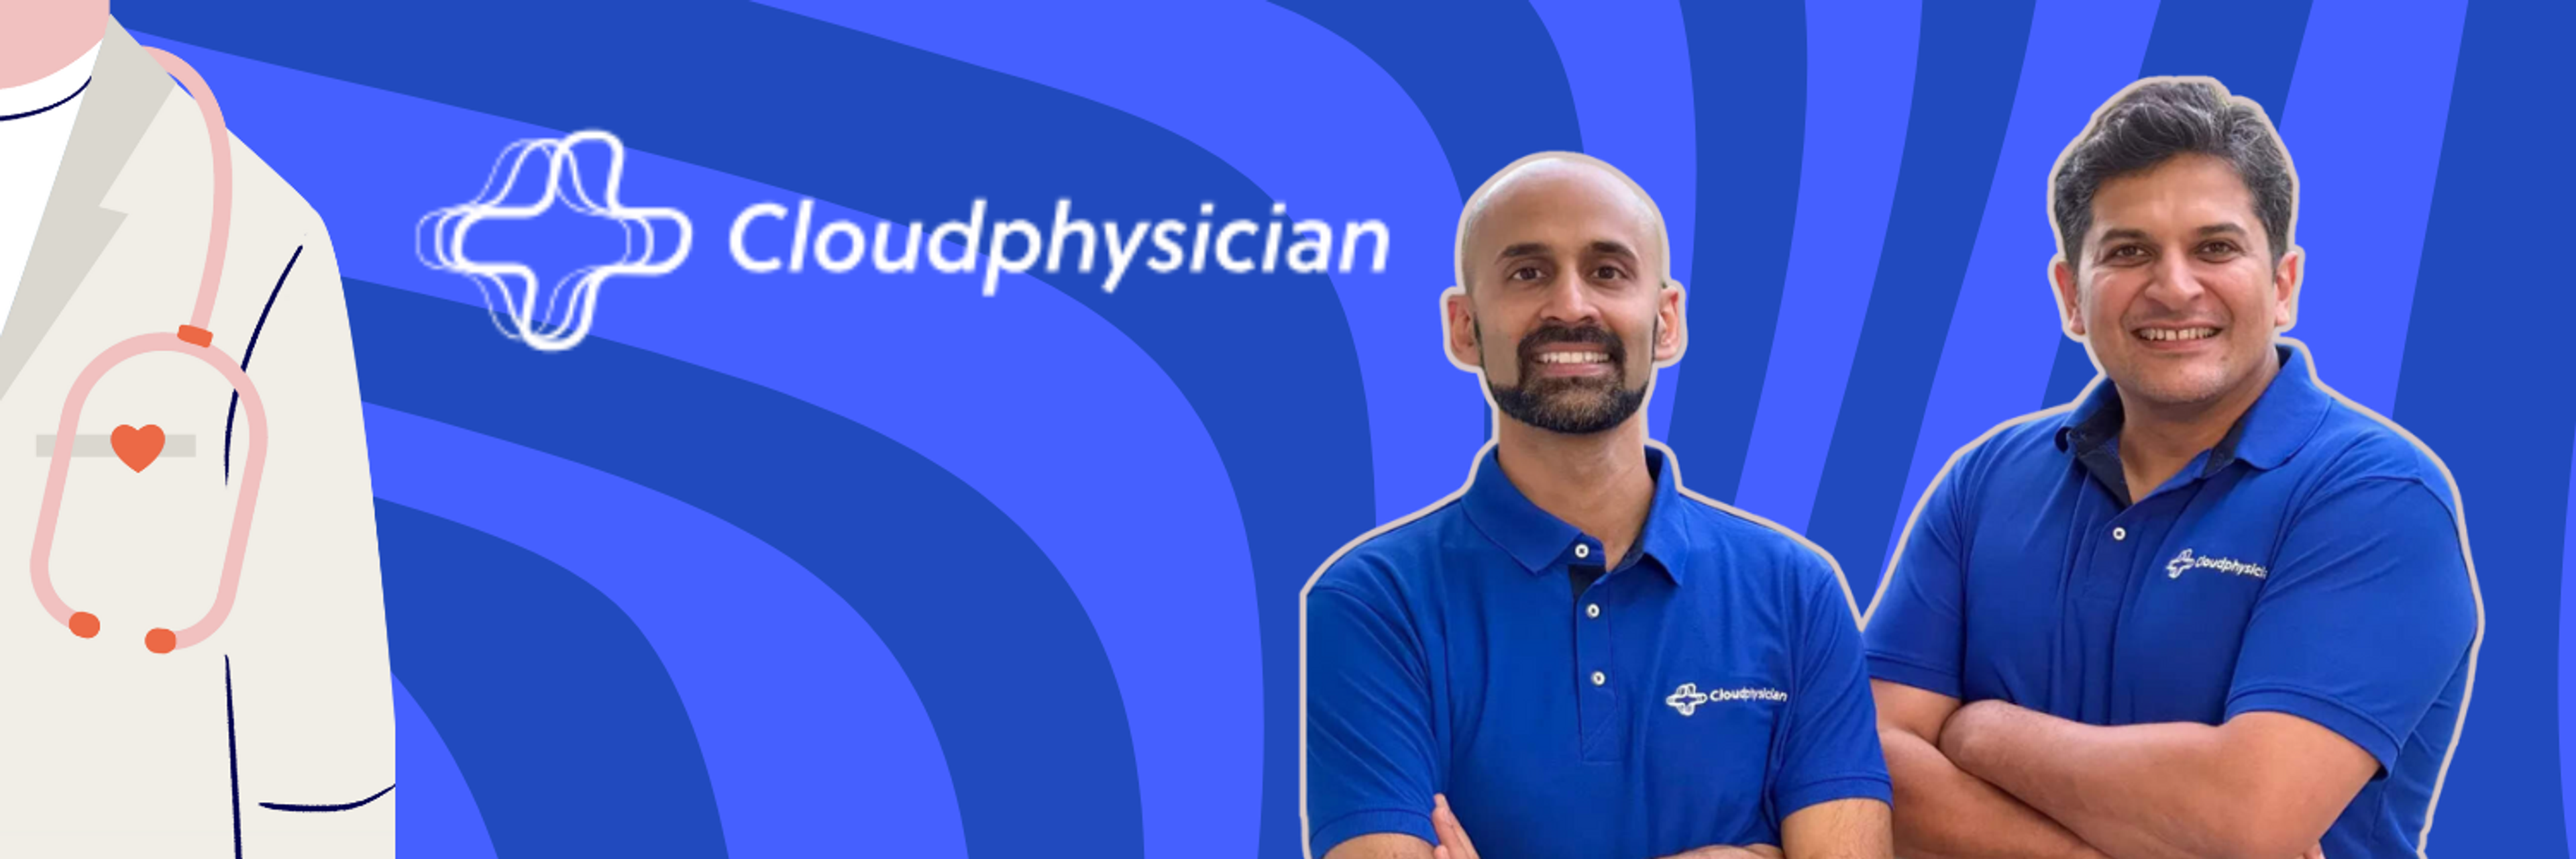 The image features a promotional banner for Cloudphysician, an AI healthcare company. On the left side of the banner, there's a graphic of a doctor wearing a lab coat with a stethoscope, symbolizing healthcare. The center and right sections of the image display a large, bold logo of Cloudphysician against a blue background with light blue wave patterns. On the right, there are photos of two smiling men, Dr. Dhruv Joshi and Dr. Dileep Raman, the co-founders, wearing blue polo shirts with the Cloudphysician logo, representing the leadership behind the company. The overall design conveys a professional and innovative healthcare service.